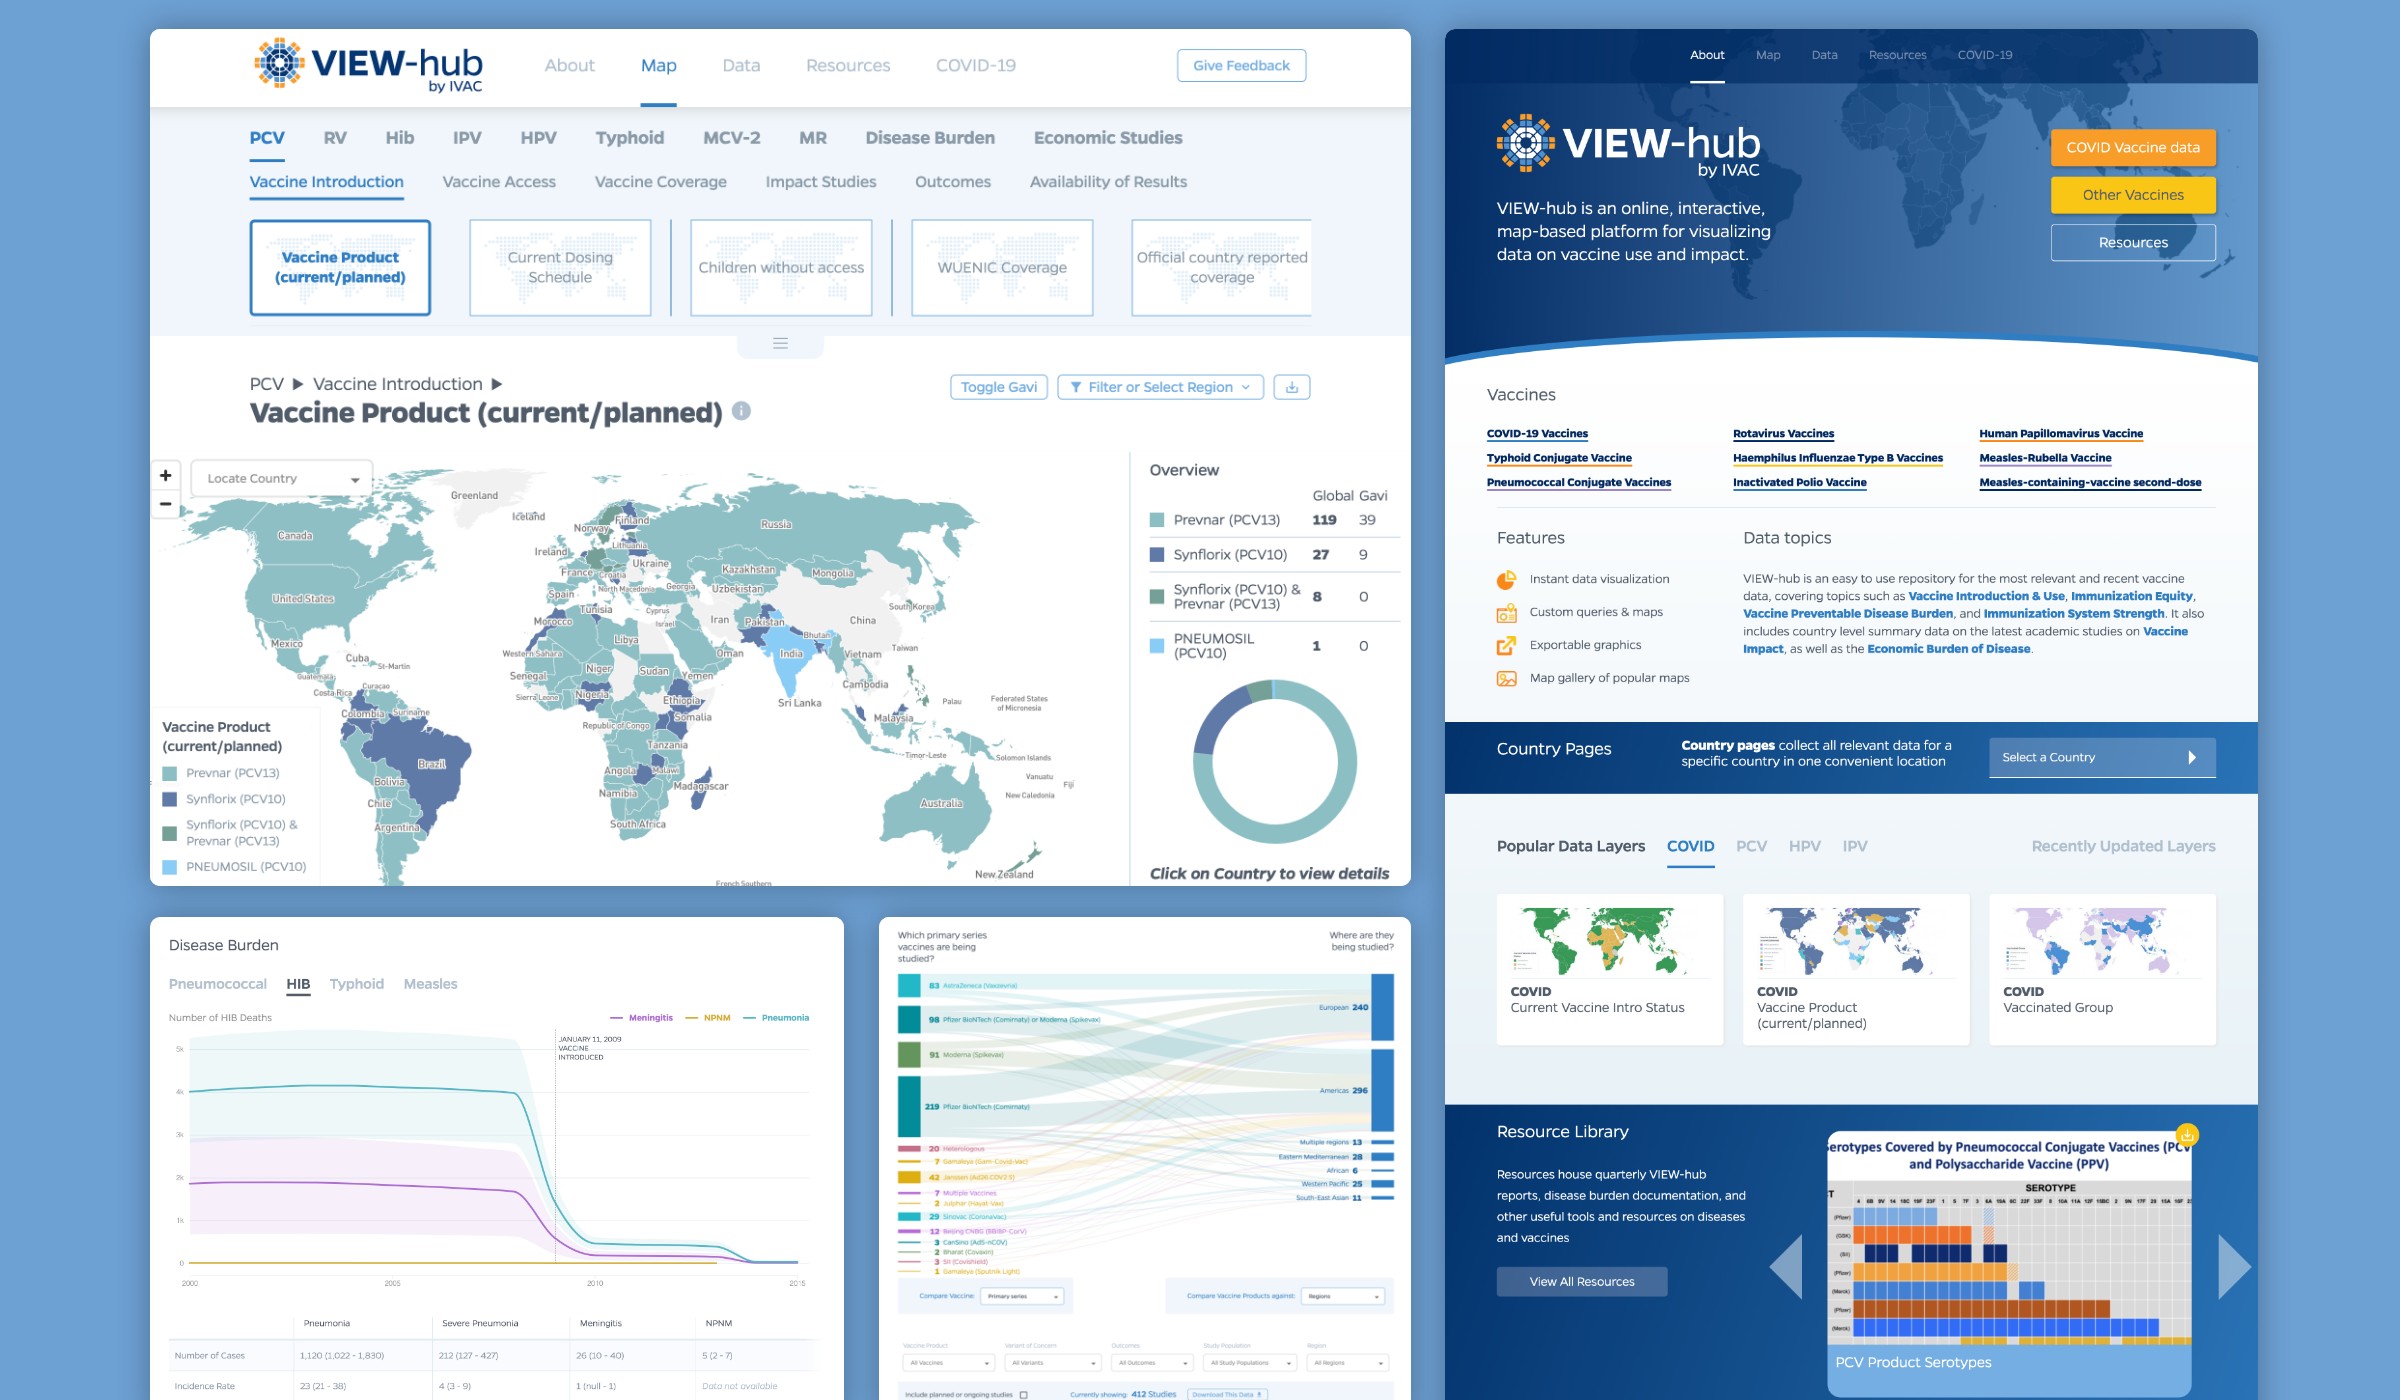 A montage of visualizations designed by Graphicacy for the VIEW-hub website, a public health platform for vaccine data